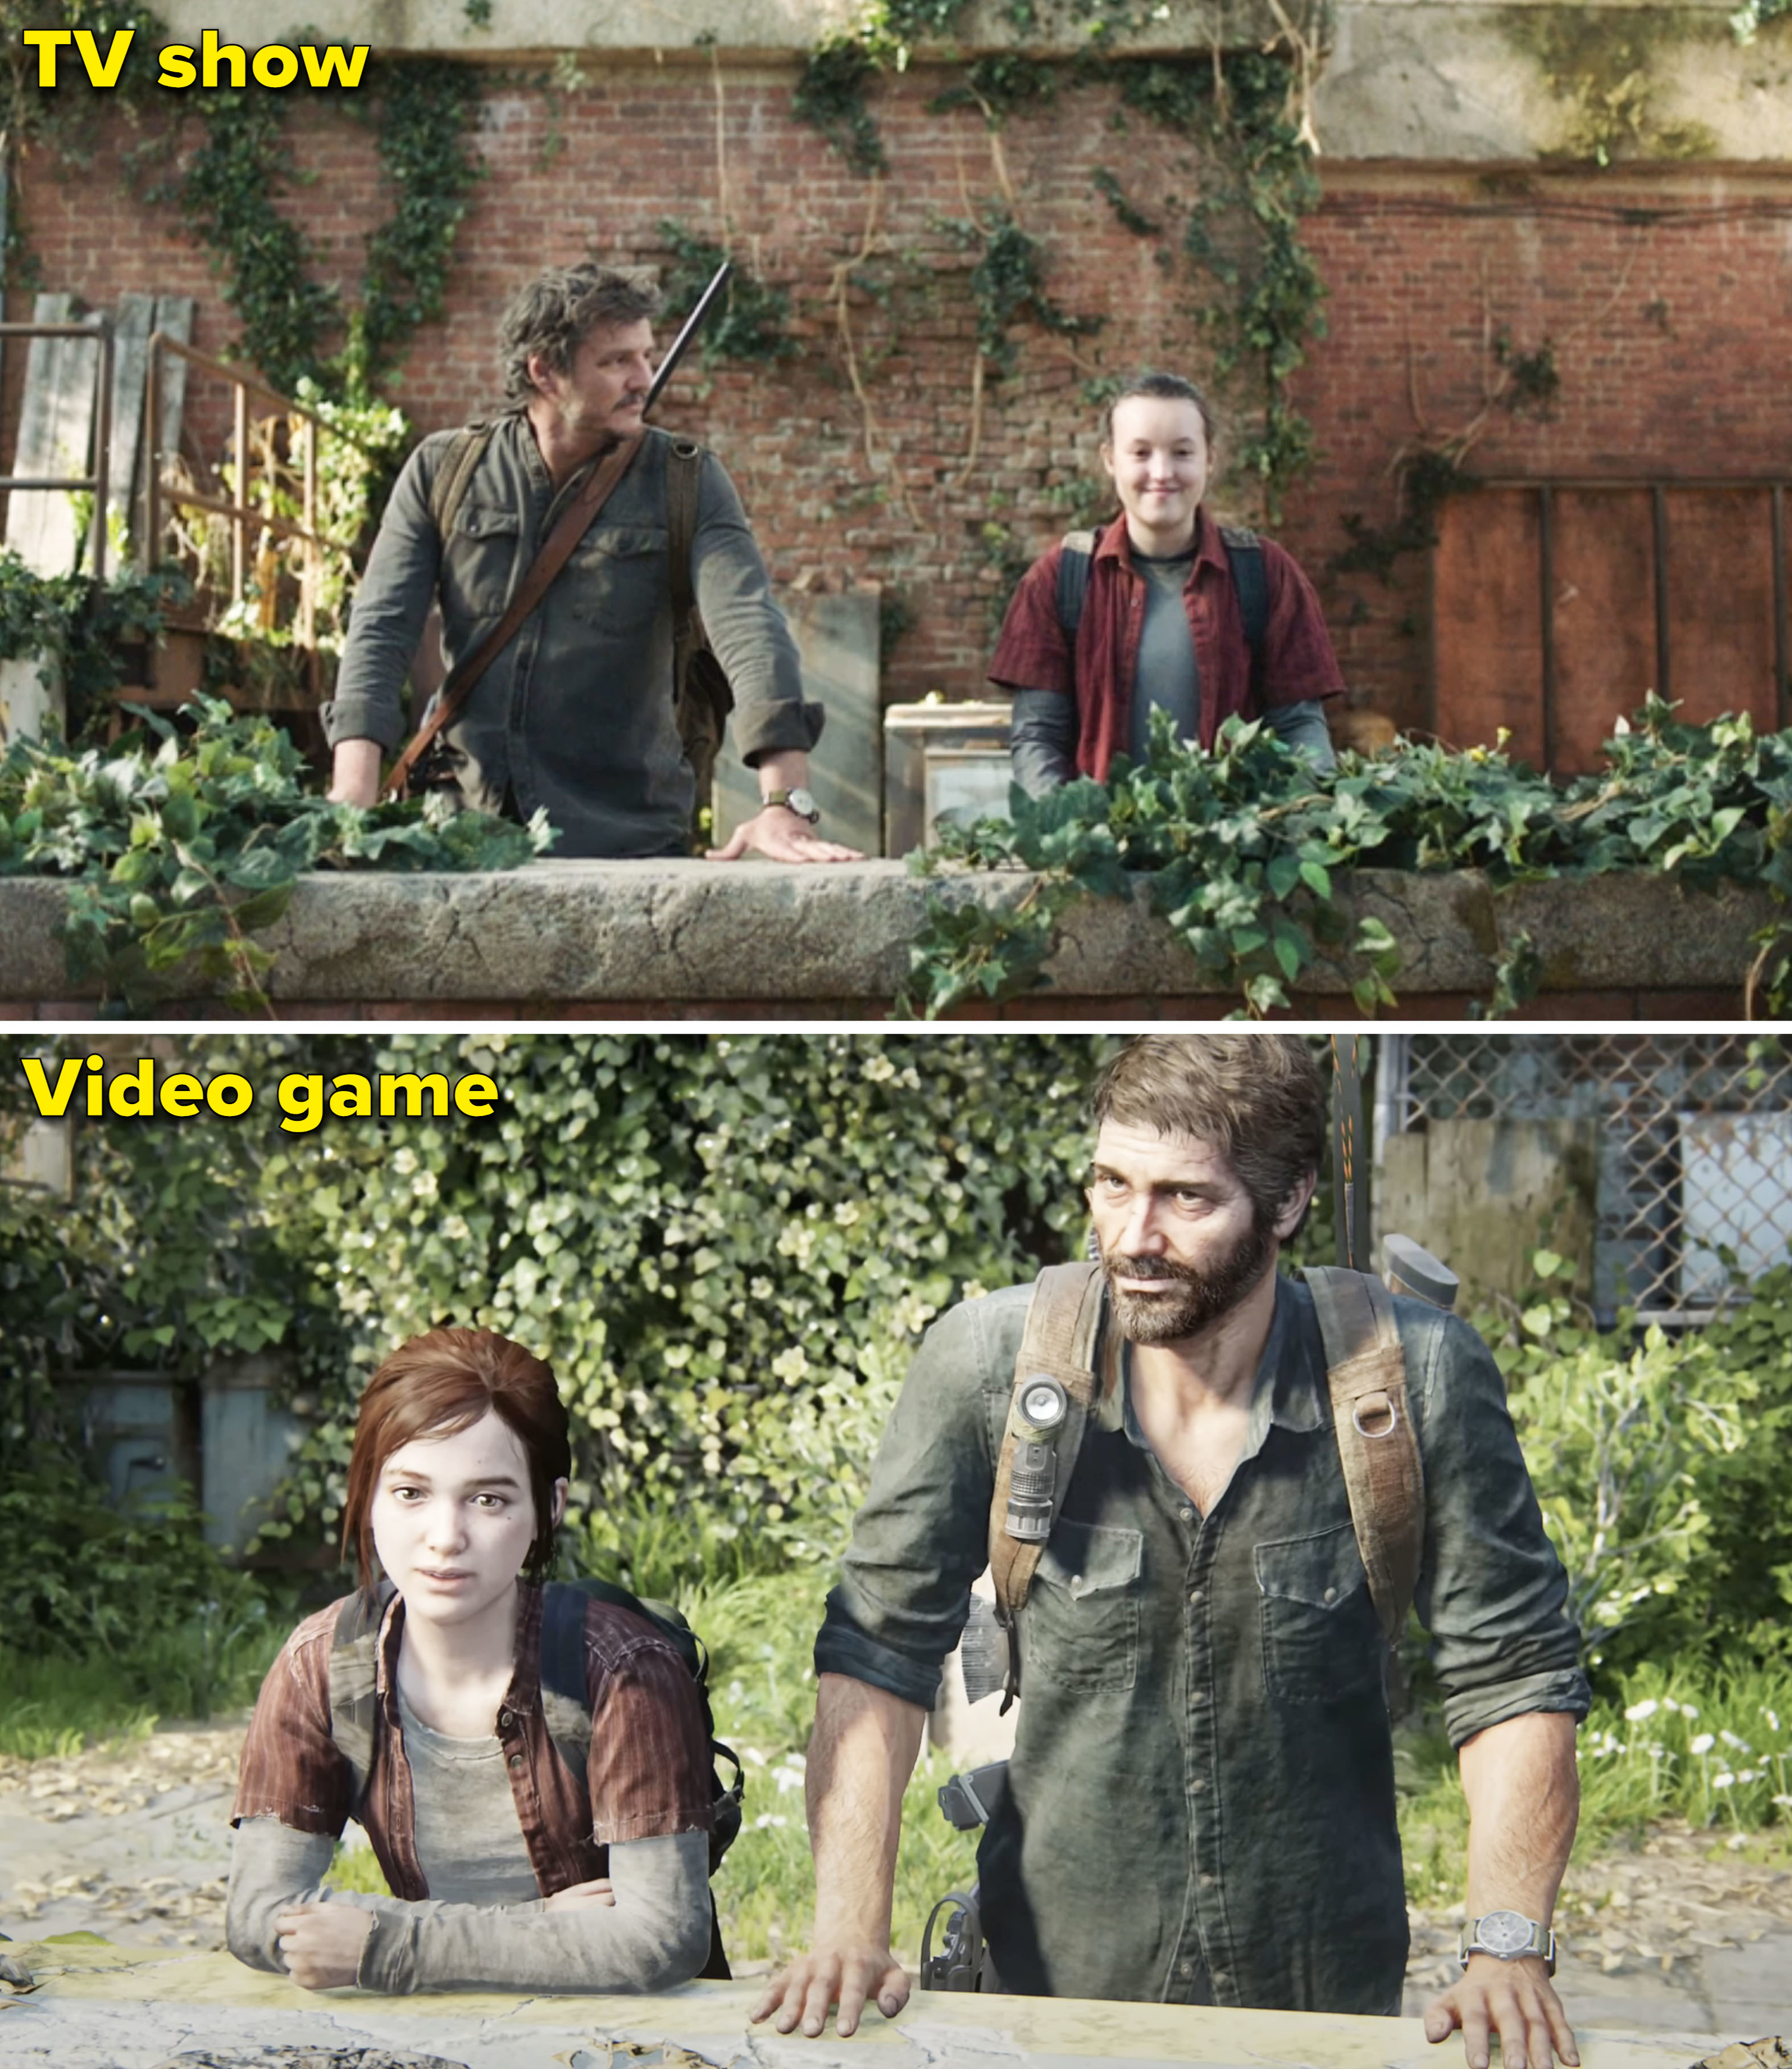 The Last of Us: How the Video Game and TV Show Connect